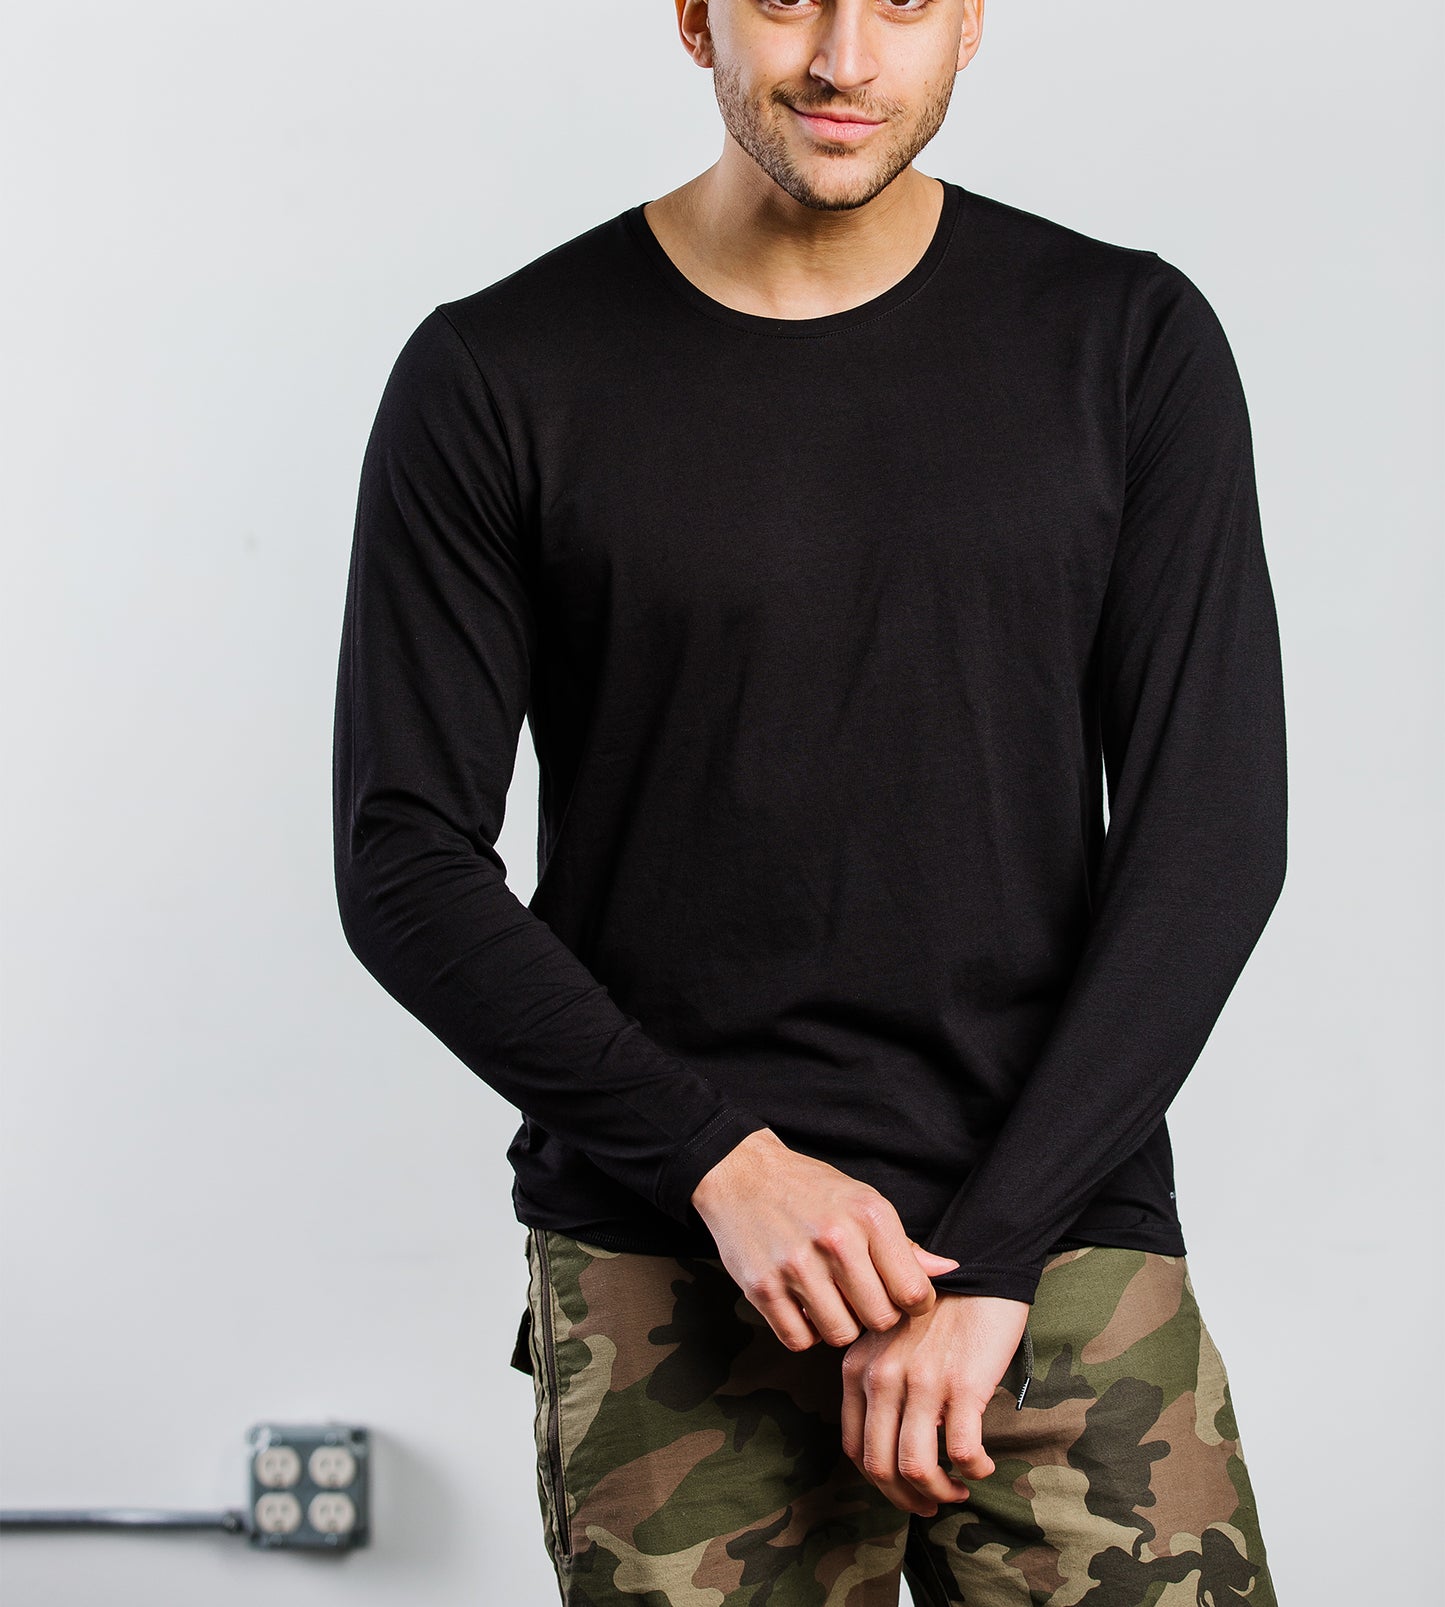 SuperSoft Long Sleeve Crew Neck Tee 2 Pack